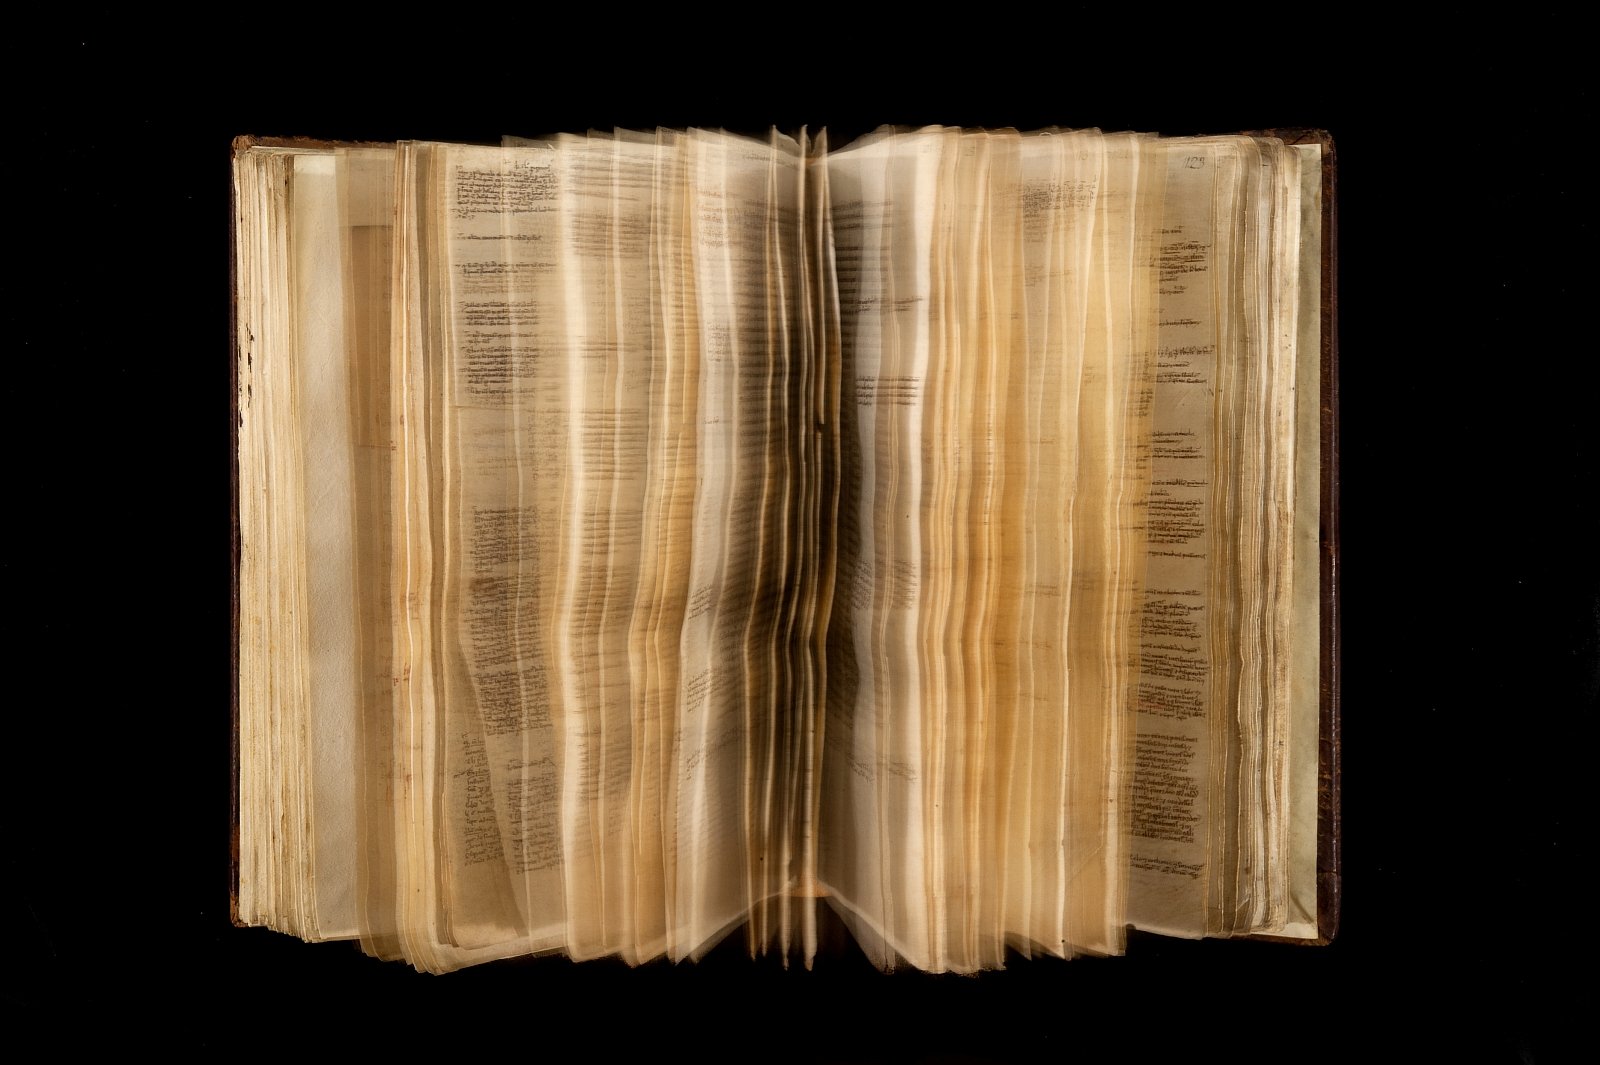 A standing book block of a manuscript with pages fanning out